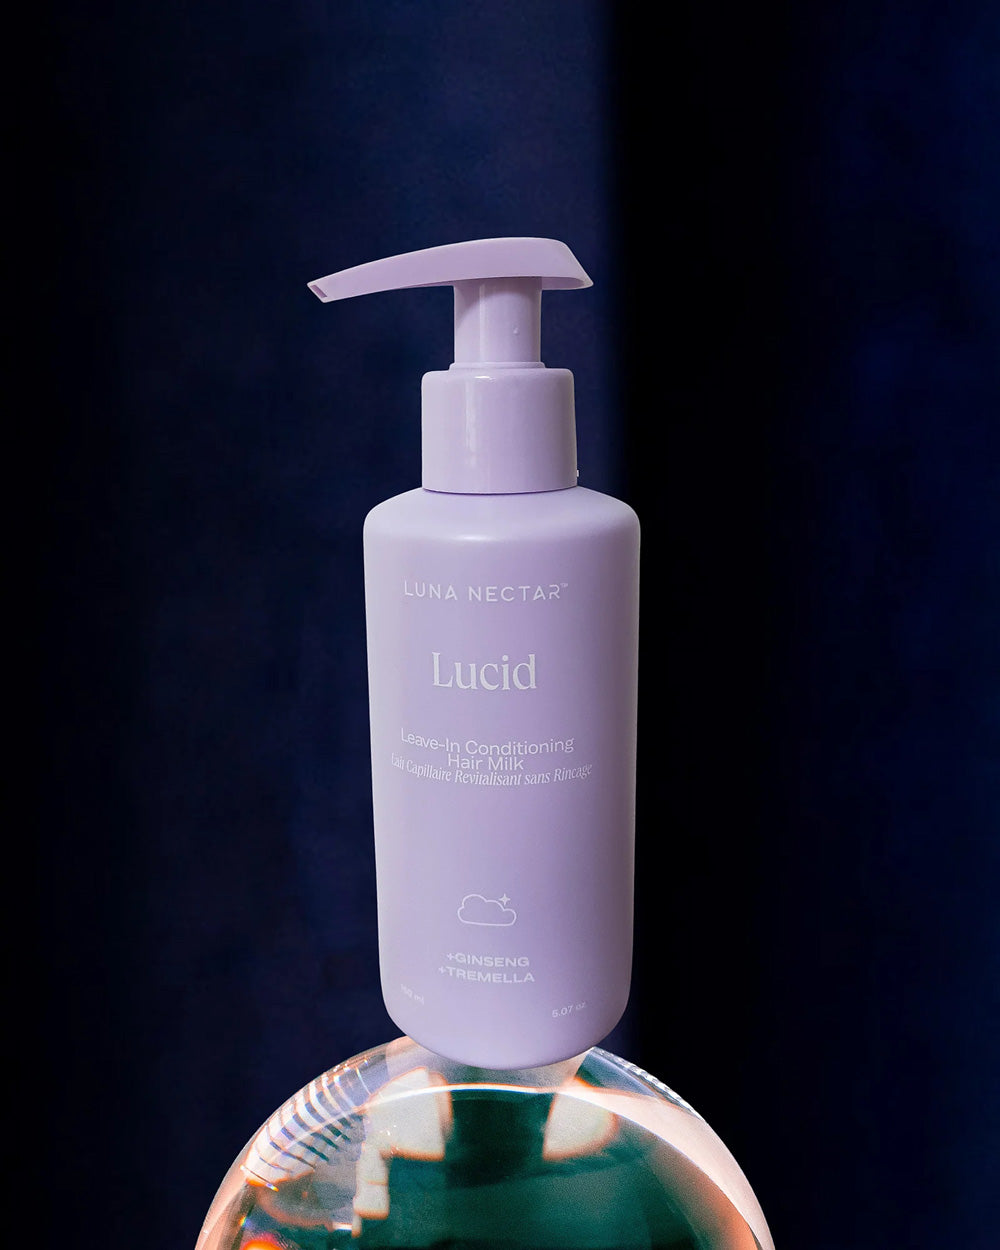 LUCID Leave-In Conditioning Hair Milk